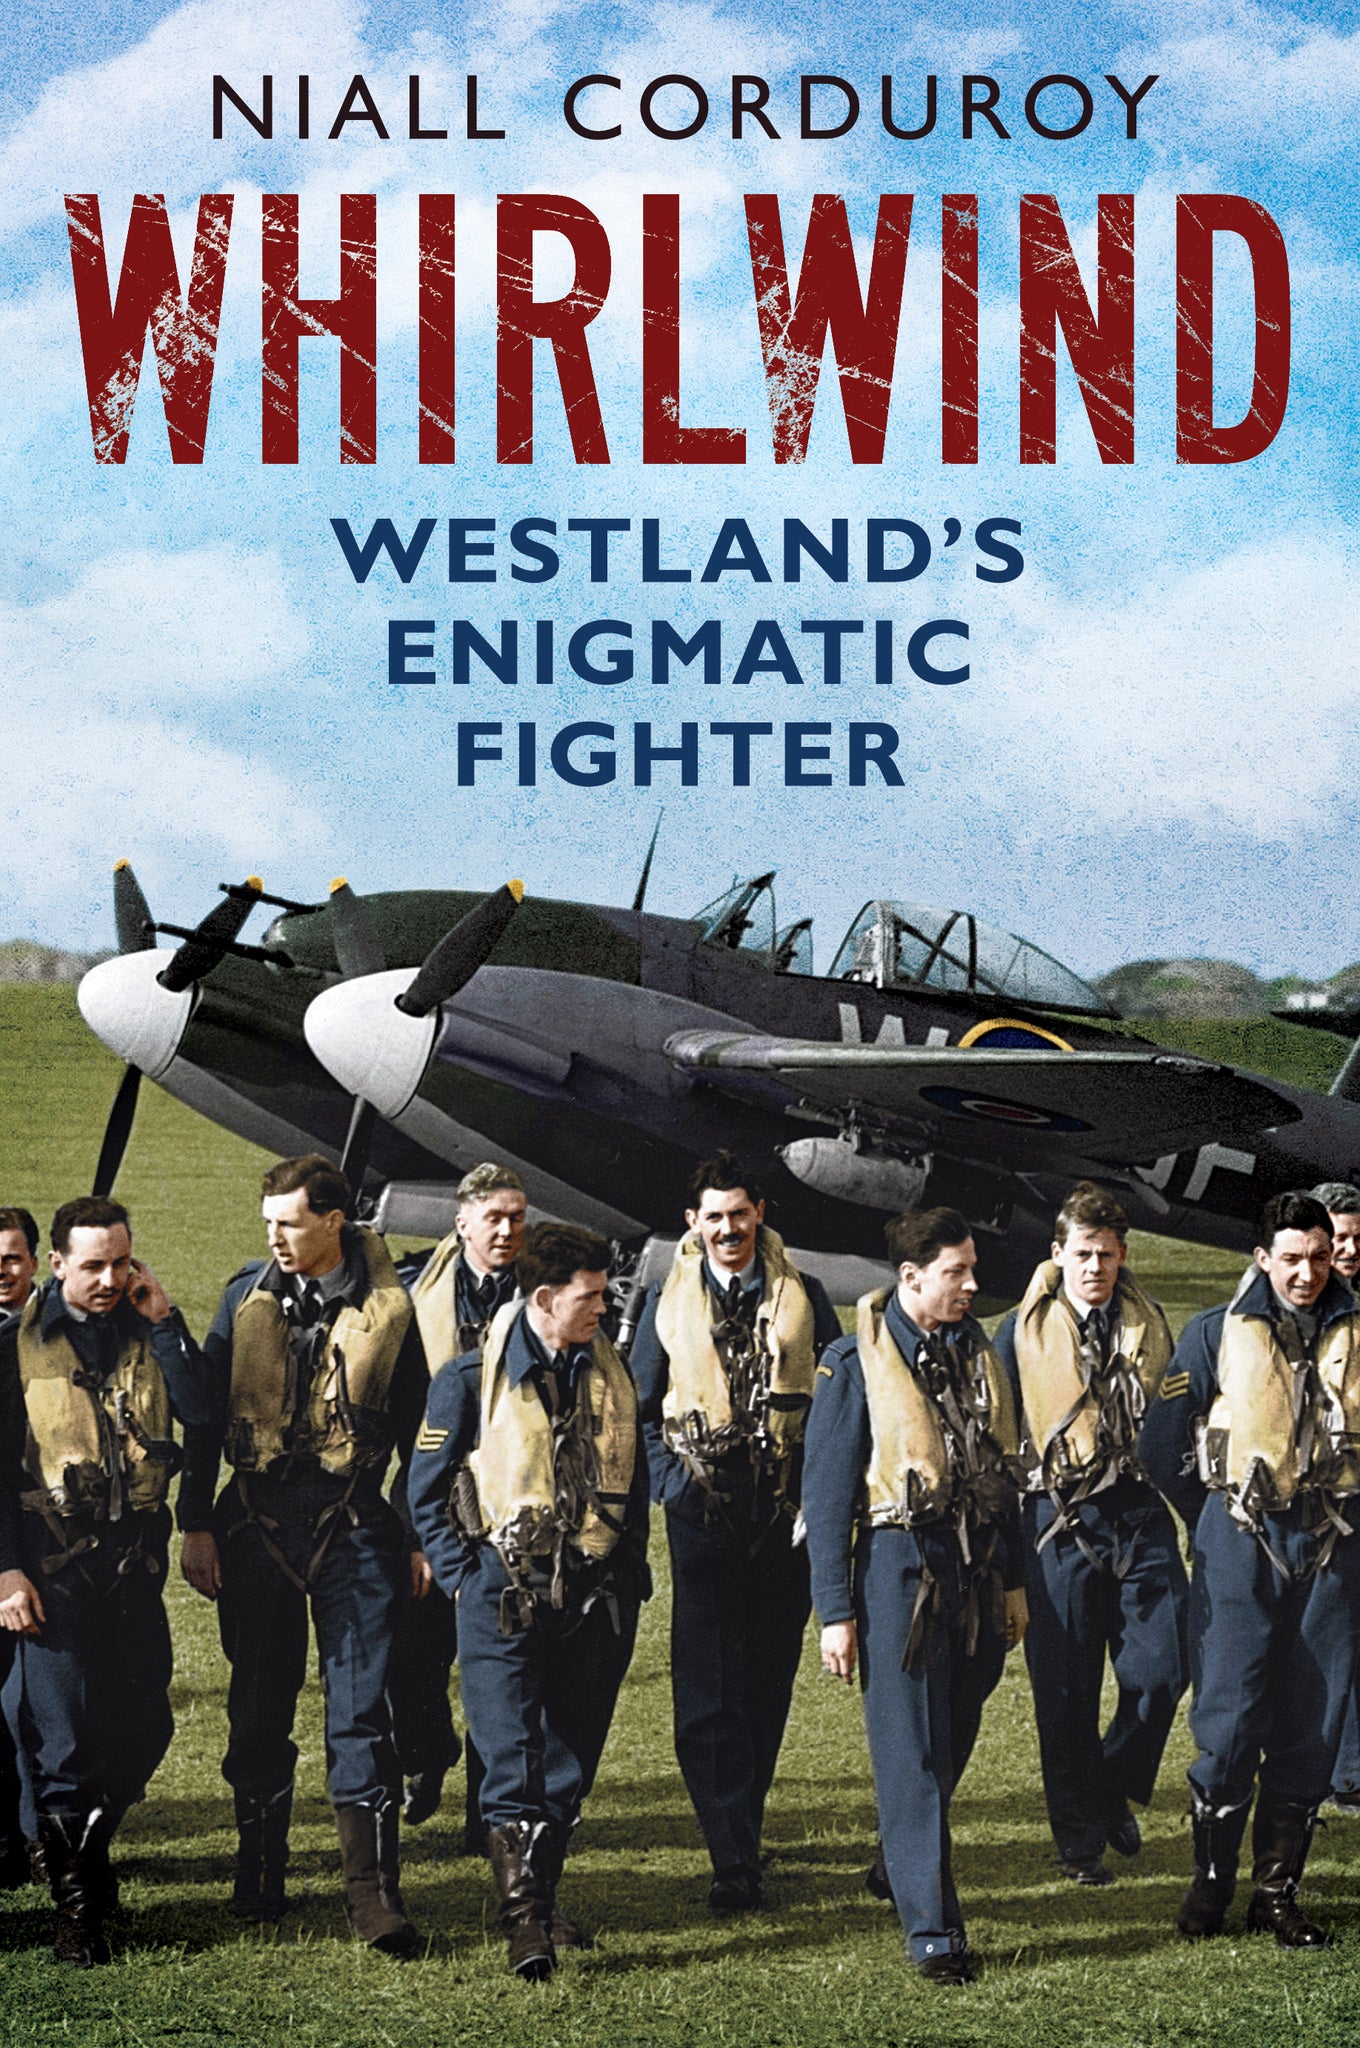 Whirlwind: Westland's Enigmatic Fighter (paperback)